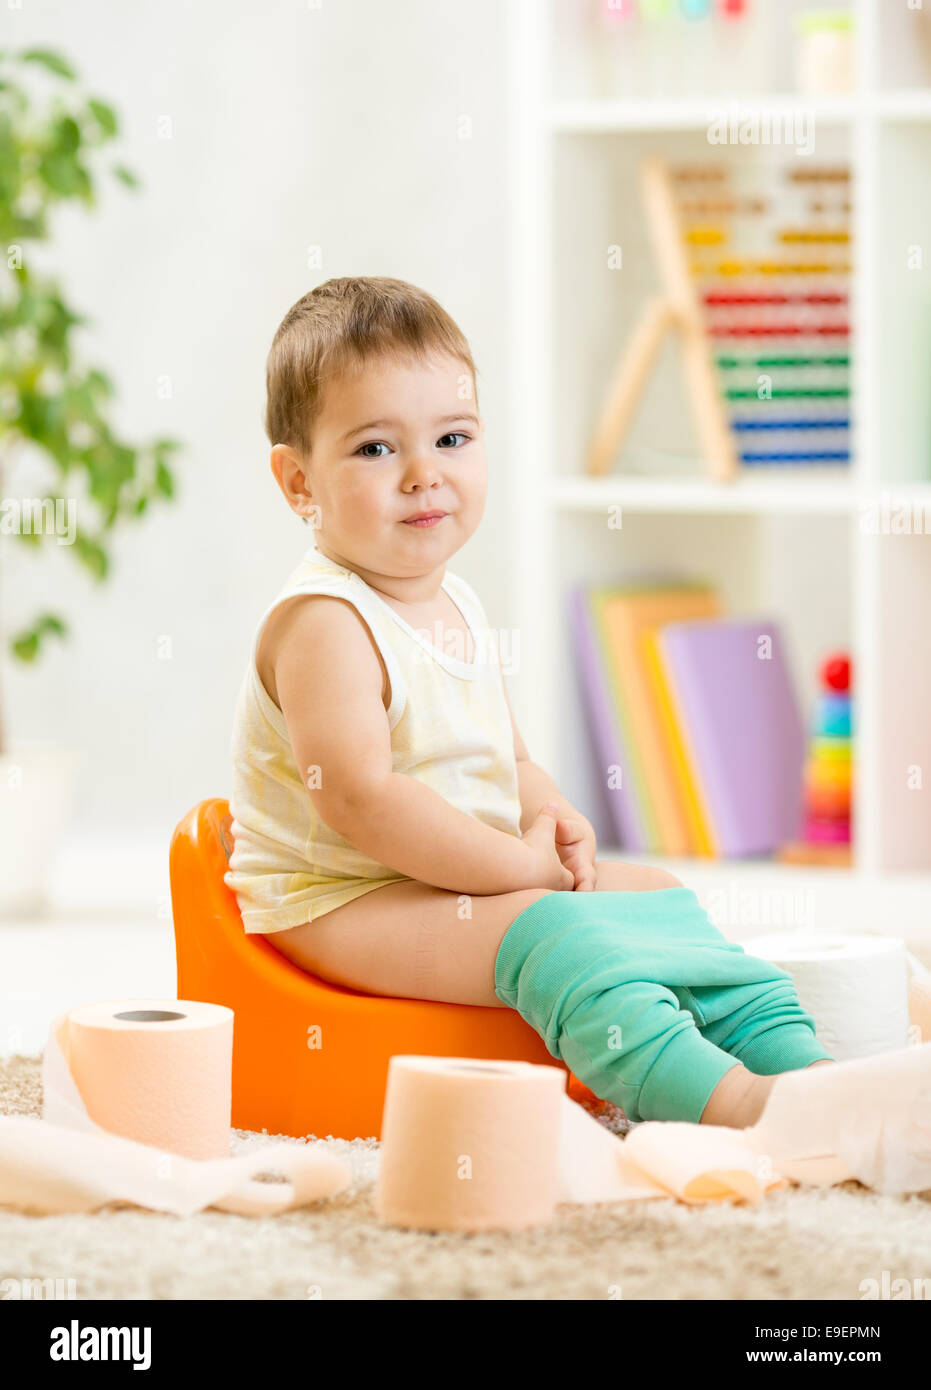 smiling child sitting on chamber pot with toilet paper Stock Photo